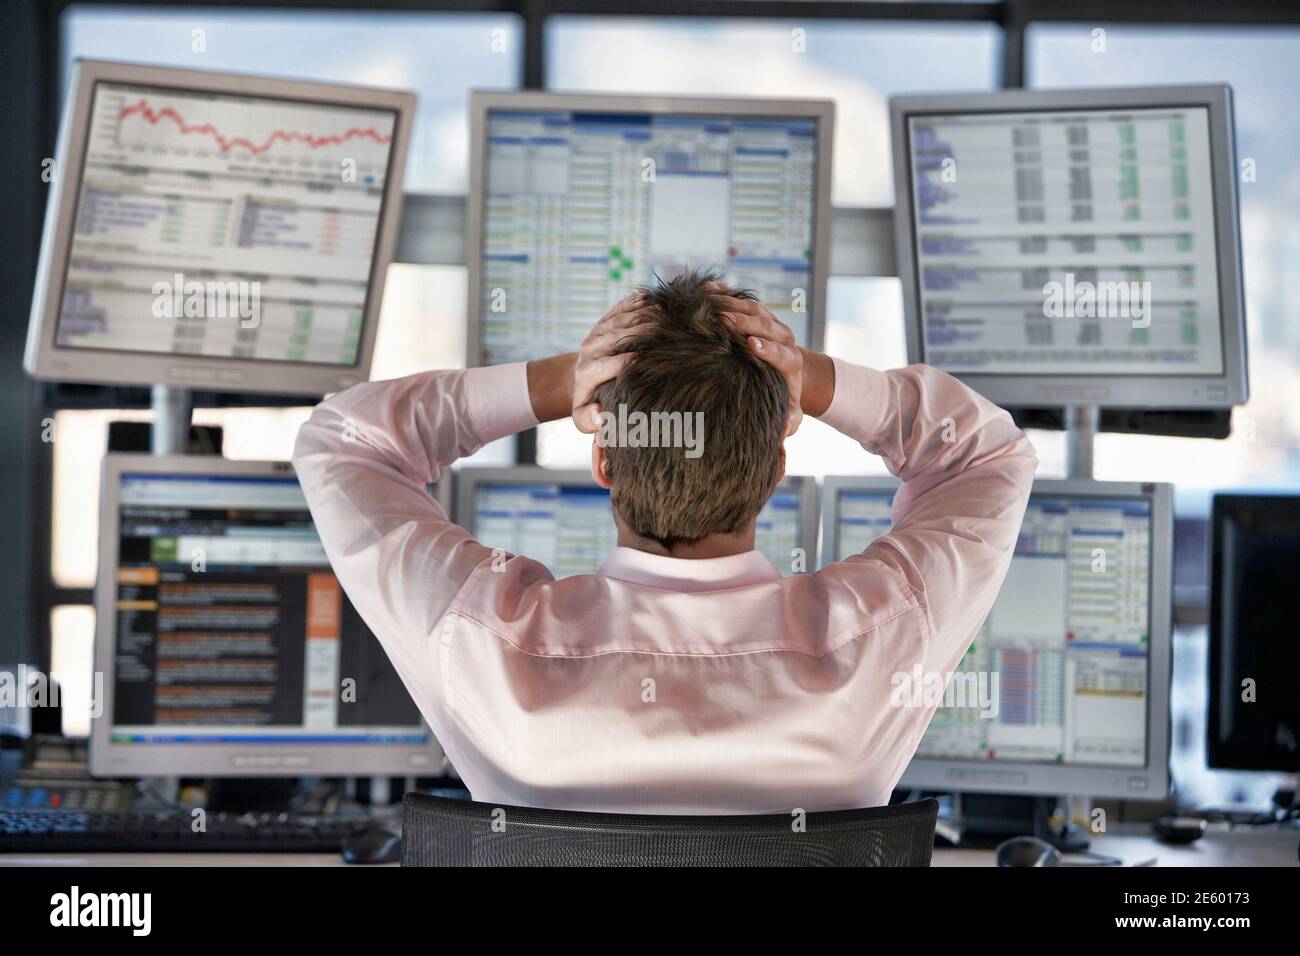 Rear view of stressed stock trader looking on computer screens Stock Photo